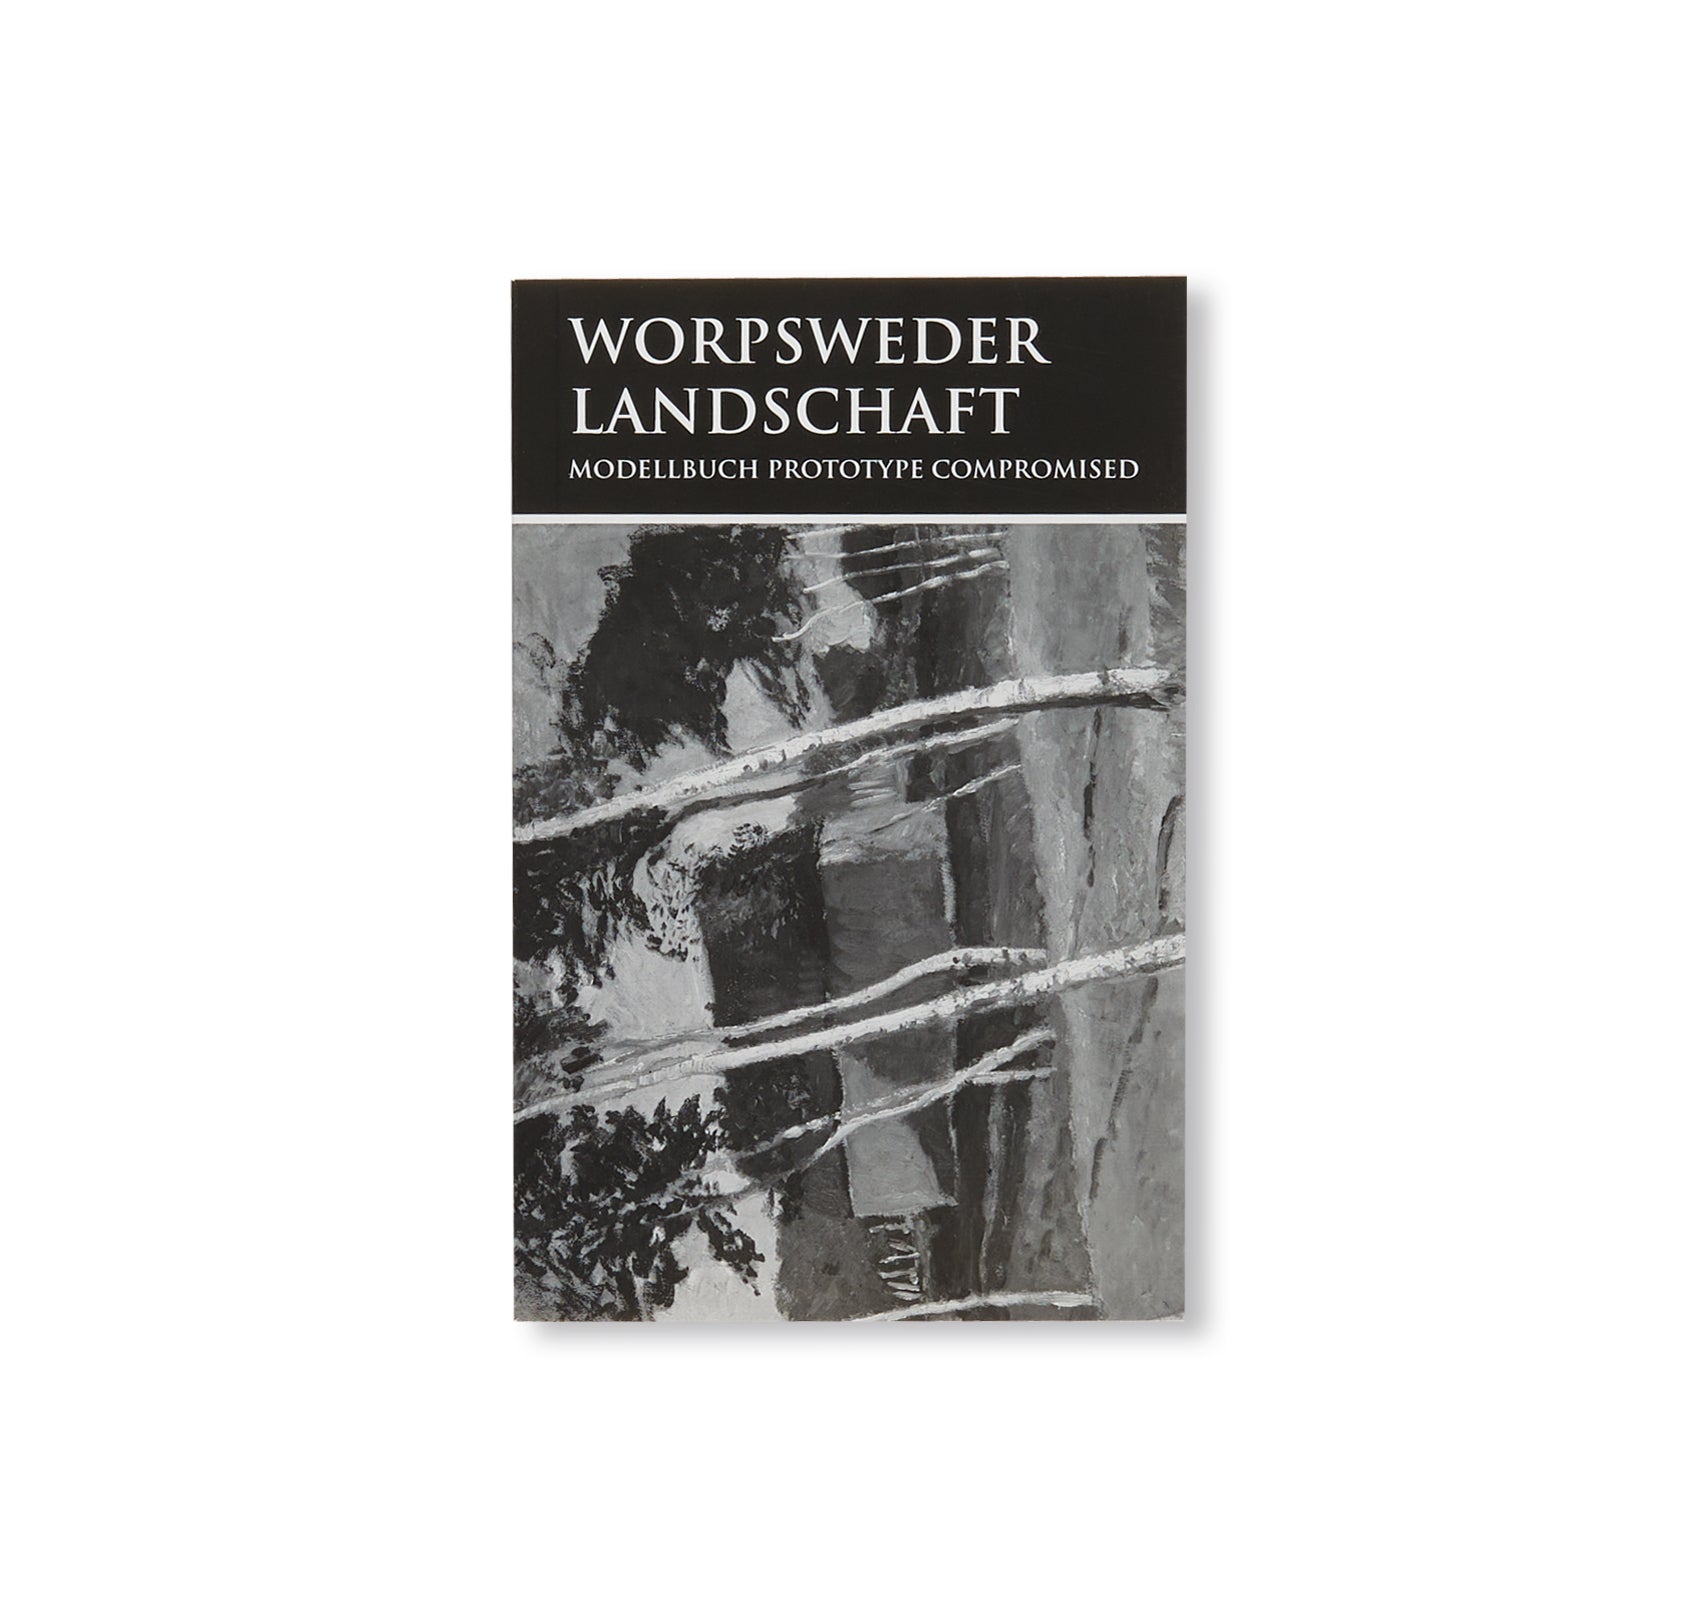 WORPSWEDER LANDSCHAFT: MODELLBUCH PROTOTYPE COMPROMISED by Christopher Williams